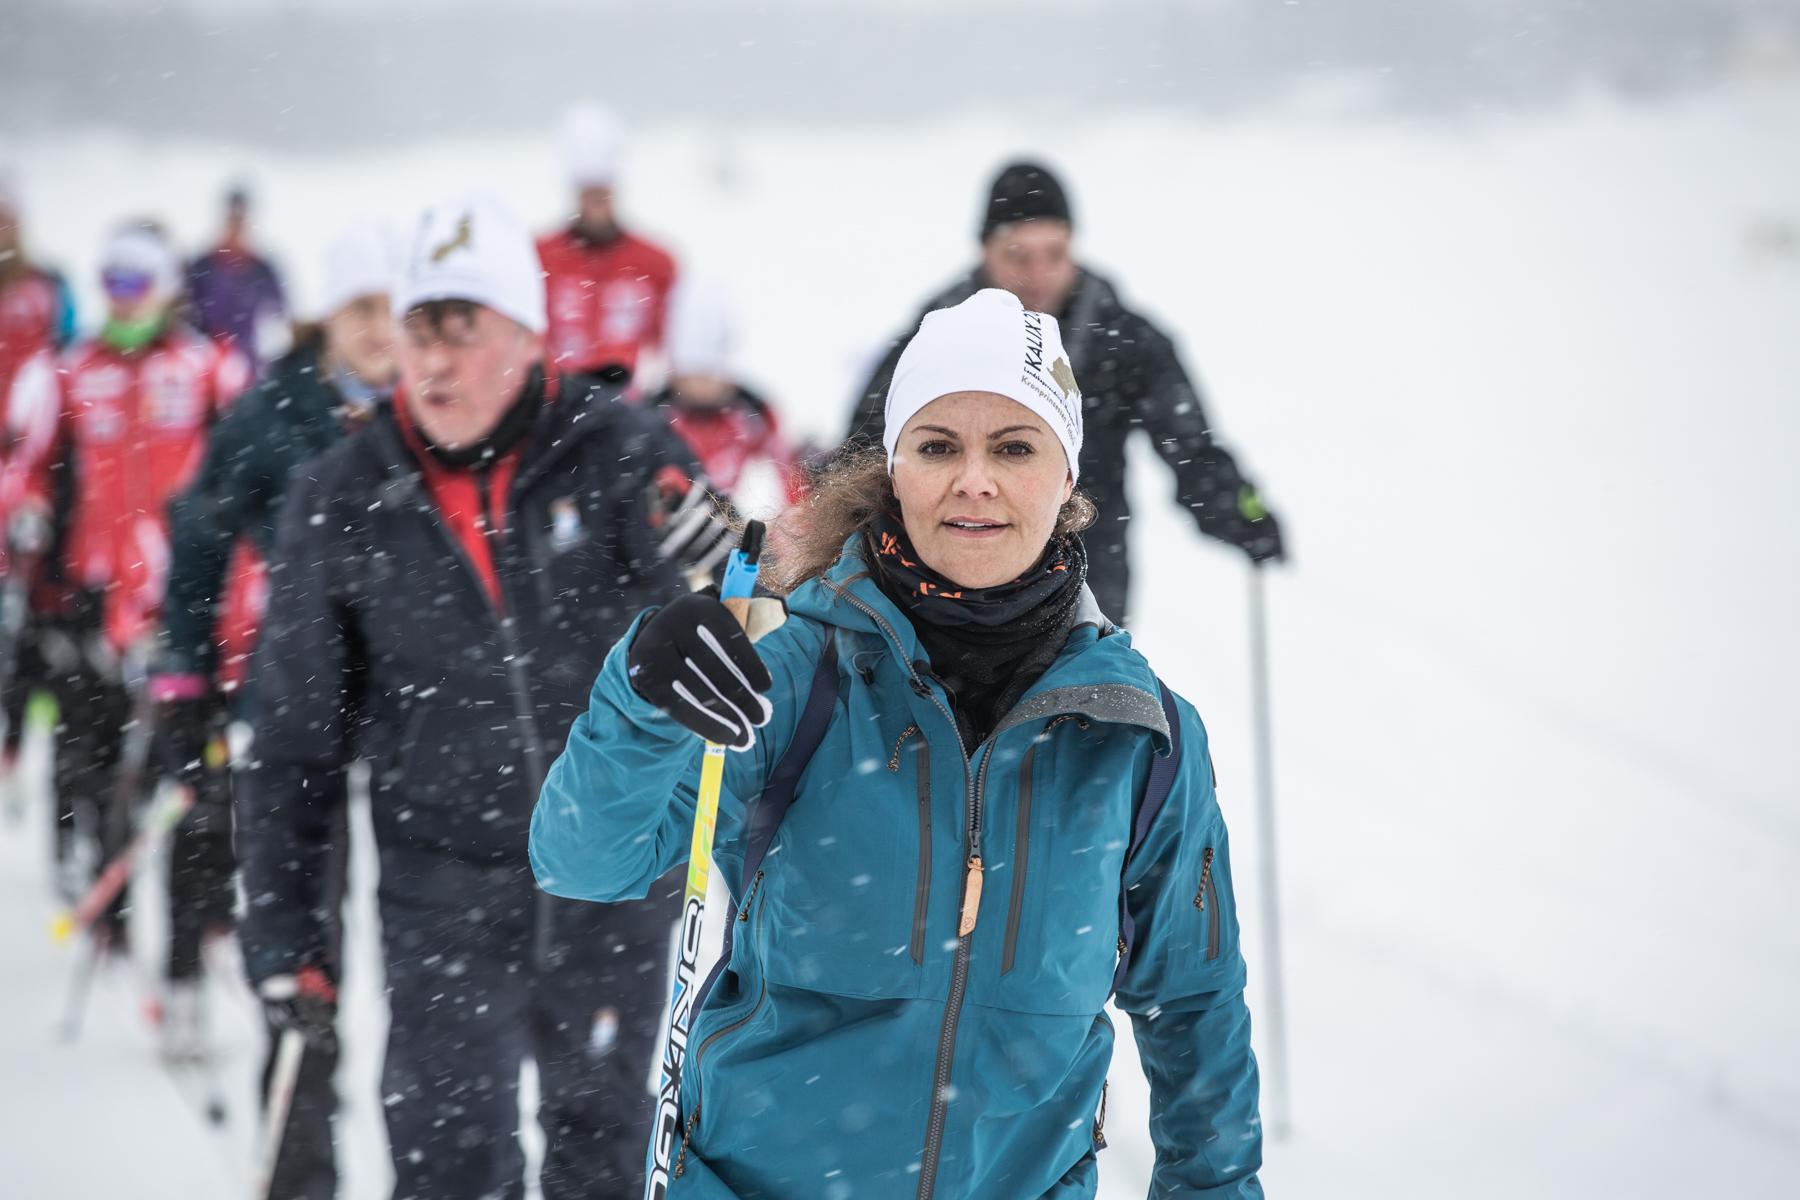 Crown Princess Victoria in sporty winter clothes, skiing together with other people.